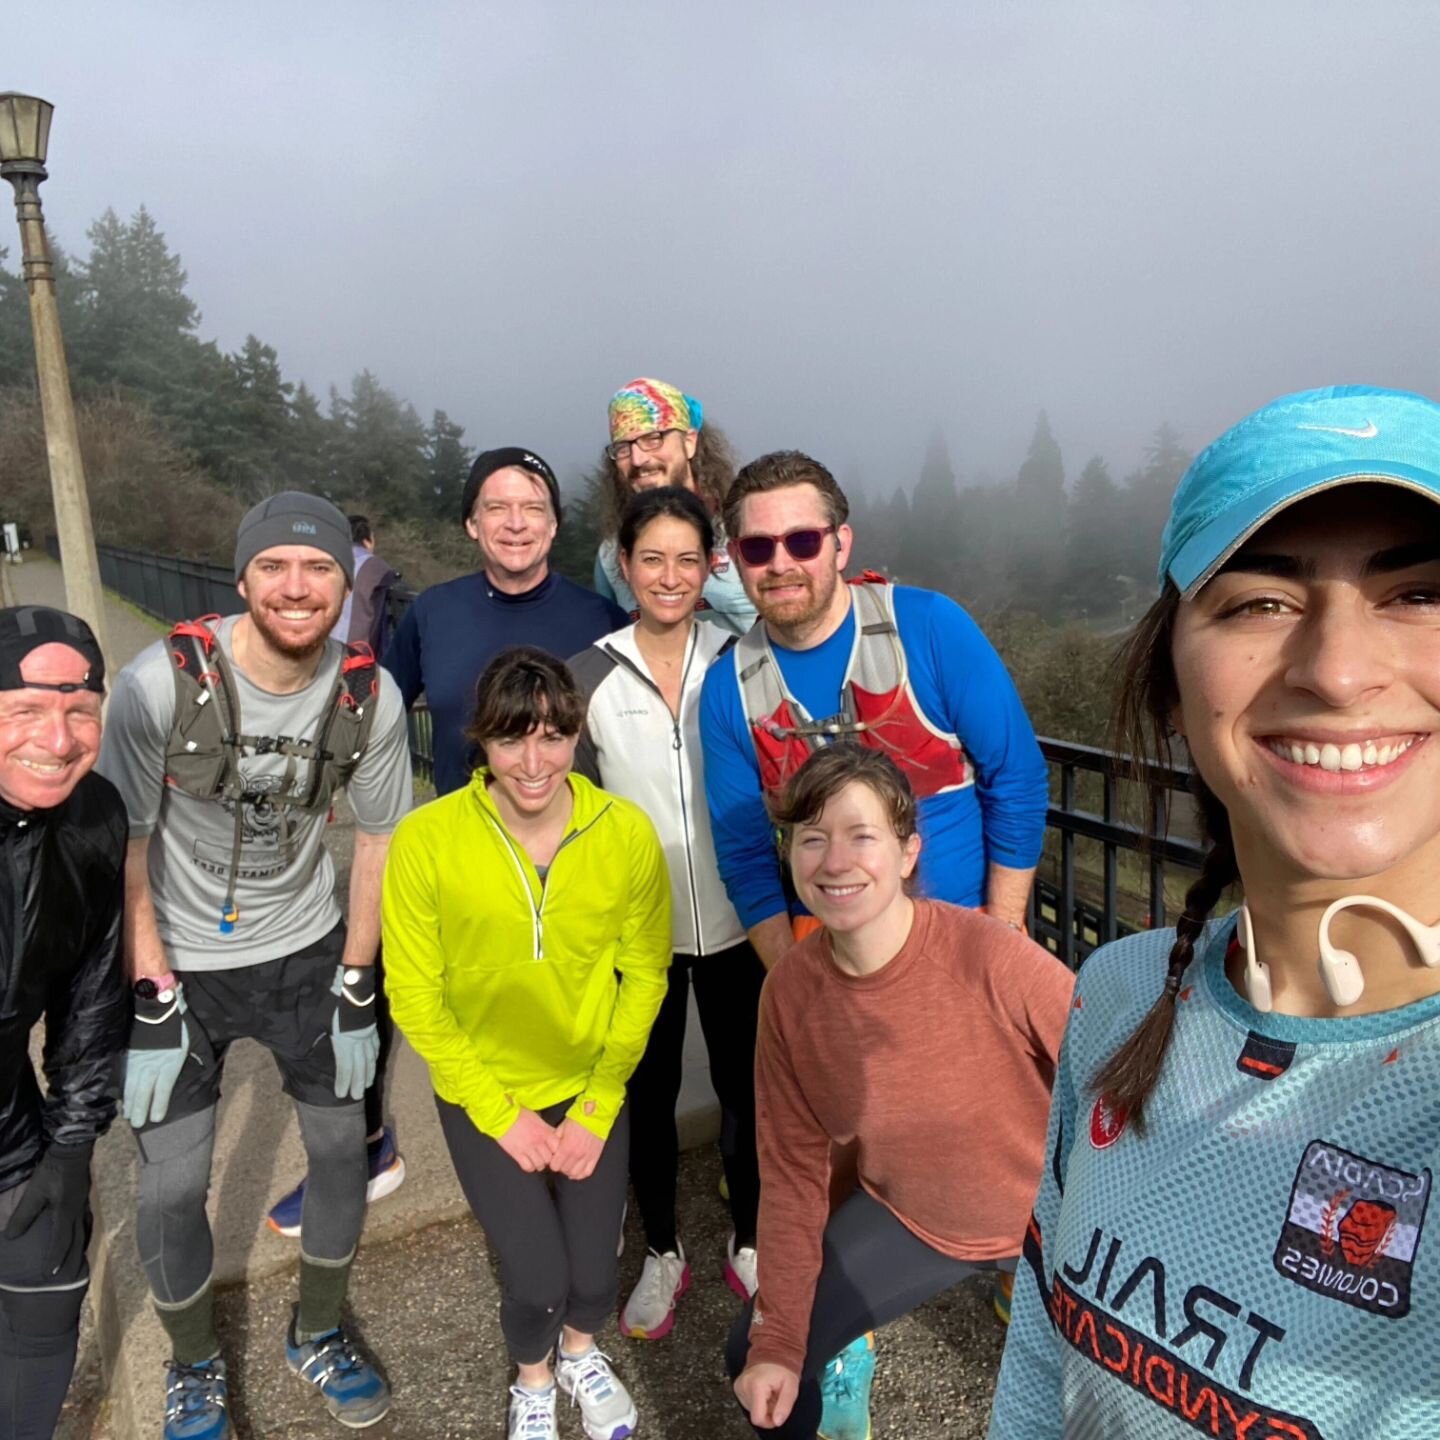 Only 2 more weeks until @shamrockpdx!! Join our Sunday training run up Terwilliger. Layer up and meet at Duniway track by the bleachers at 9:30am, step off 9:45am. Our Terwilliger route is a 5 mile out and back and if you're signed up for the 15k, th